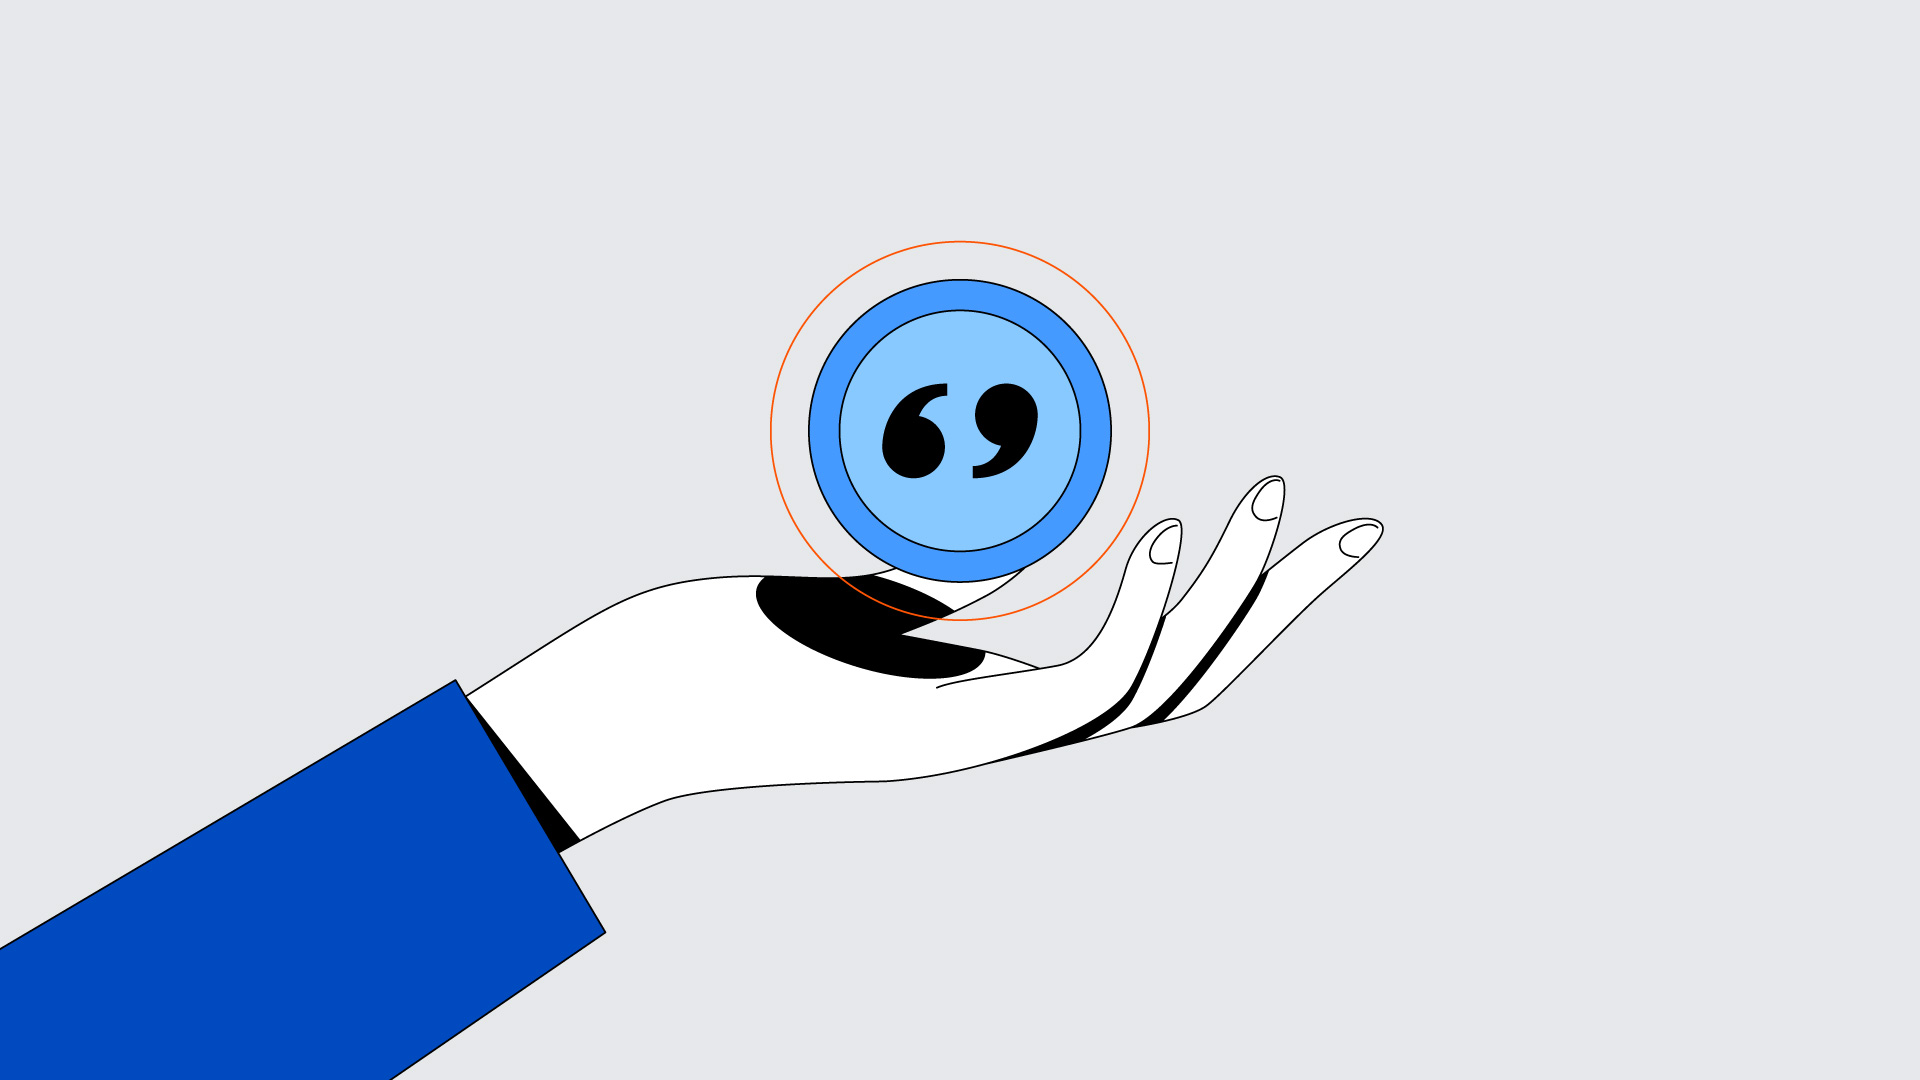 Illustration of a hand holding a flying disc with quotation marks engraved on it